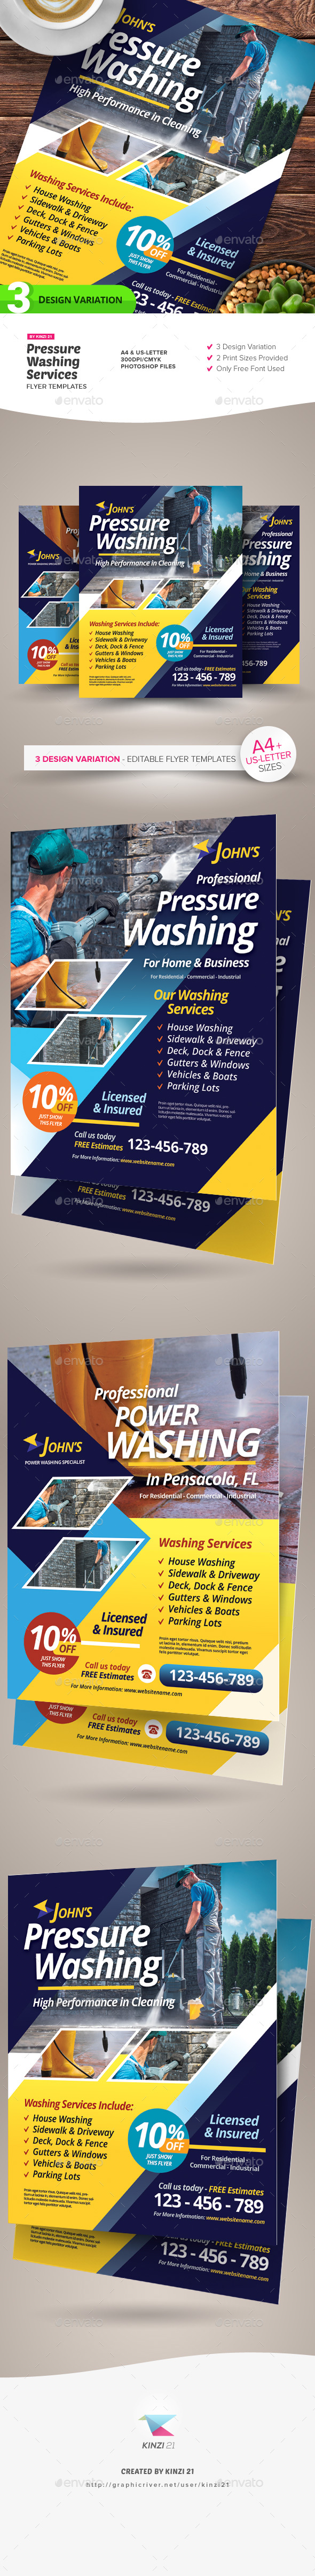 Pressure Washing Services Flyer Templates